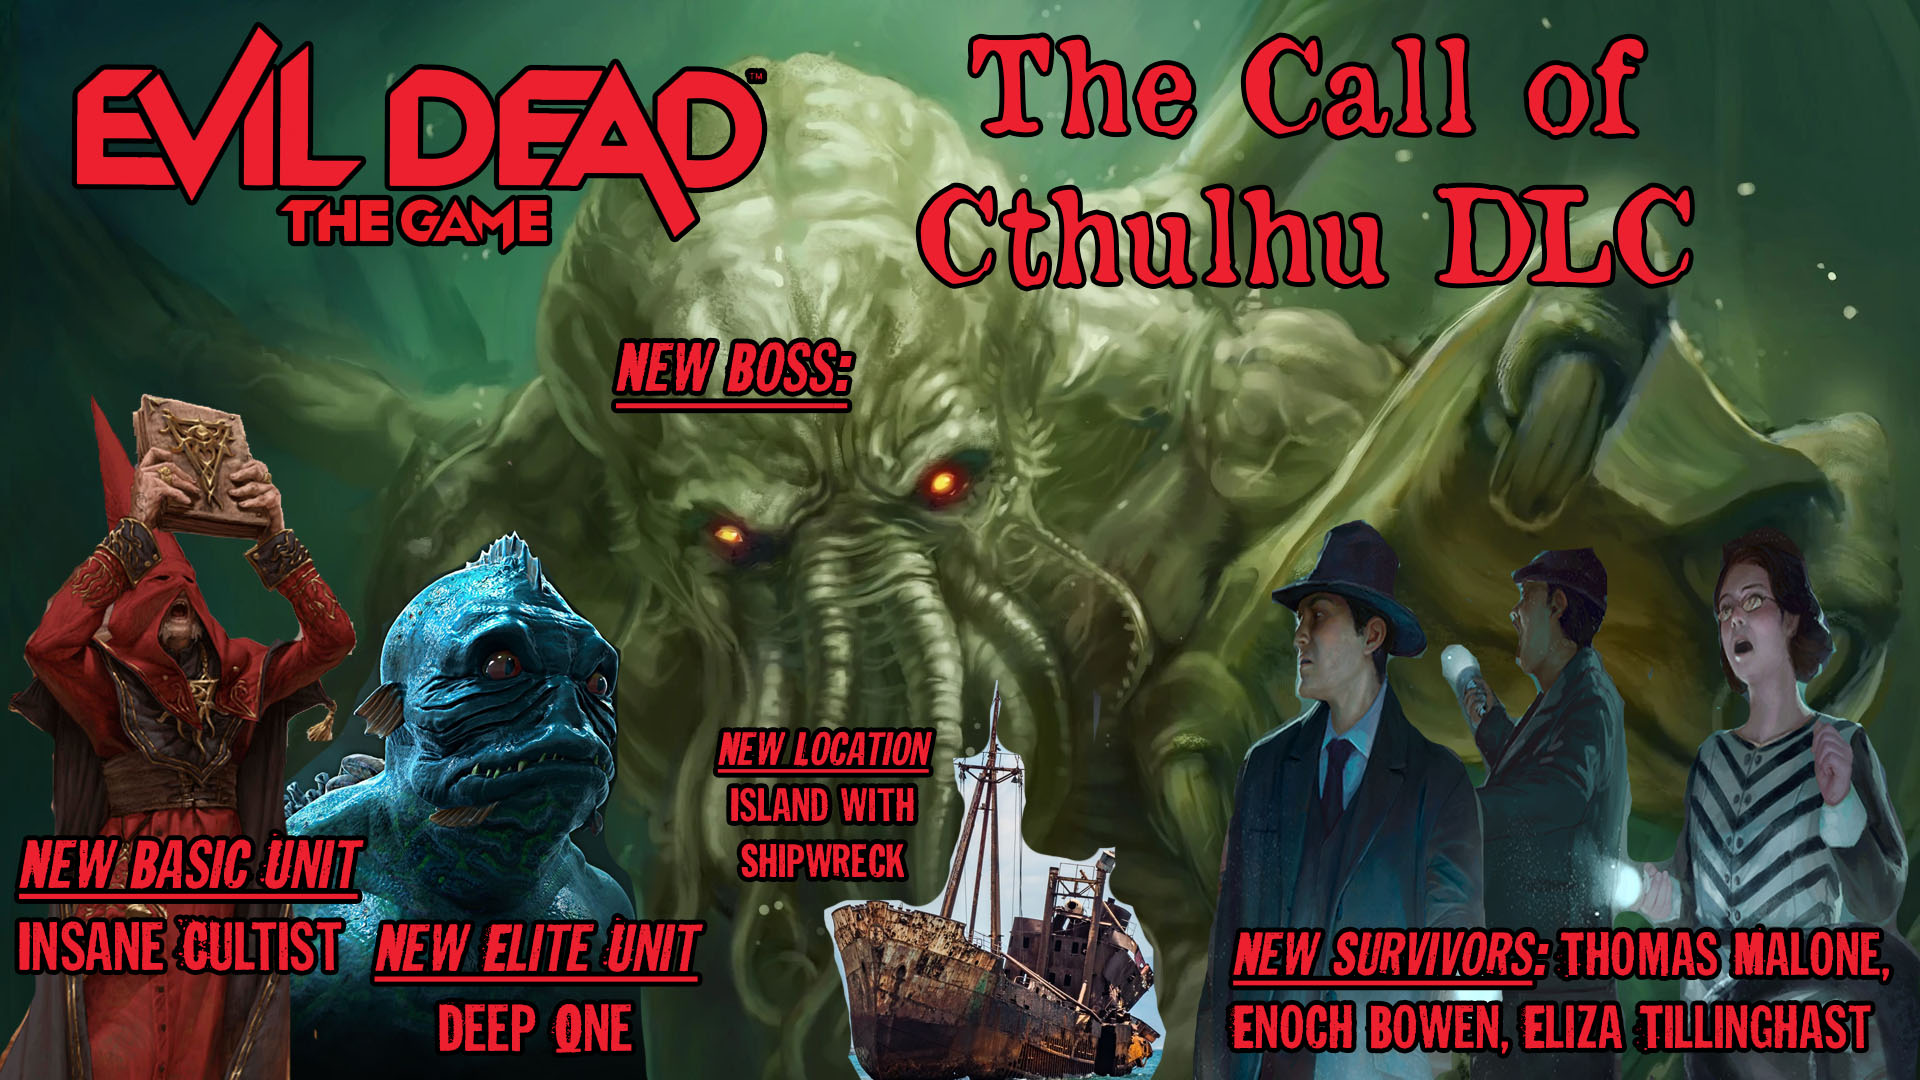 Evil Dead The Game - An Idea for a Lovecraft / Cthulhu Expansion